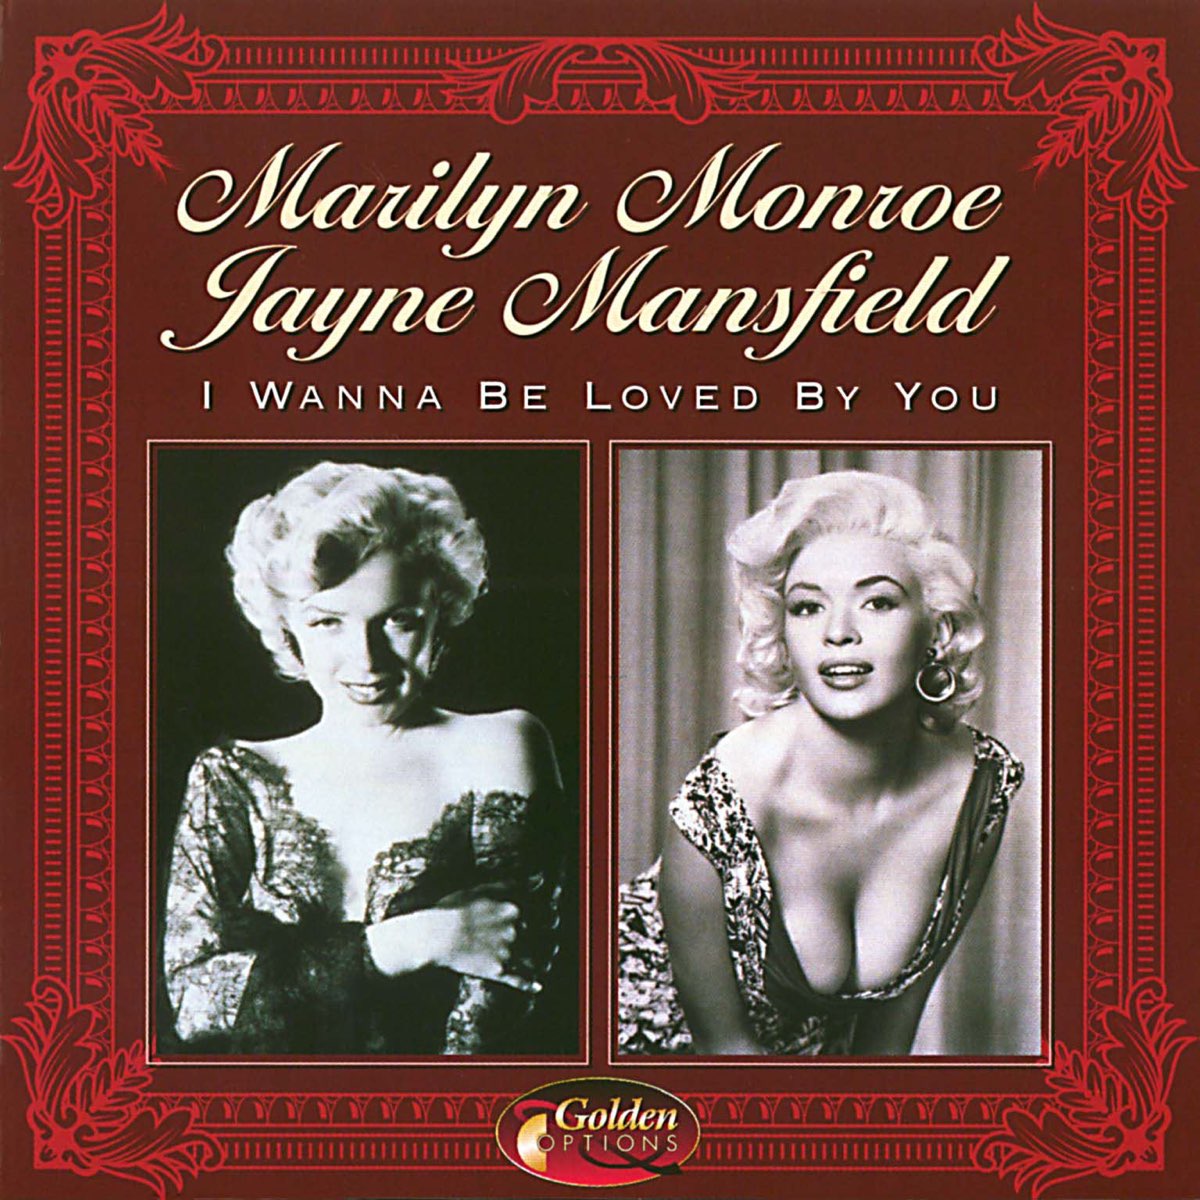 I wanna be loved by you мэрилин. Мэрилин Монро i wanna be Loved by you. Marilyn Monroe текст i wanna be Loved by you. "Marilyn Monroe" "Jayne Mansfield". I wanna be Loved by you.